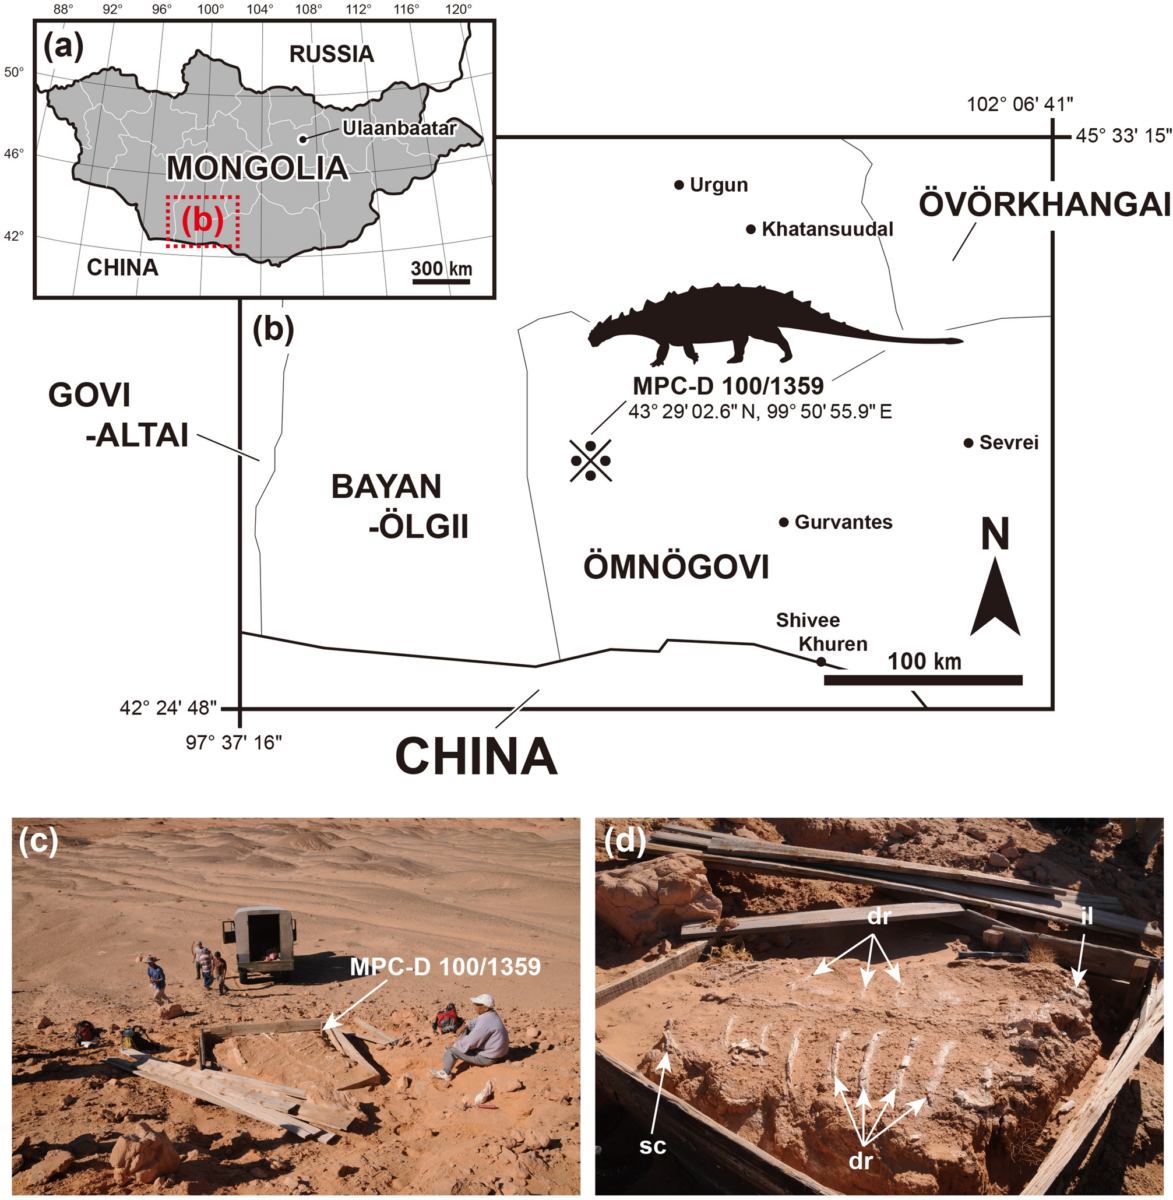 Featured image for “STEGOSAUR TRACK ASSEMBLAGE FROM XINJIANG, CHINA, FEATURING THE SMALLEST KNOWN STEGOSAUR RECORD”